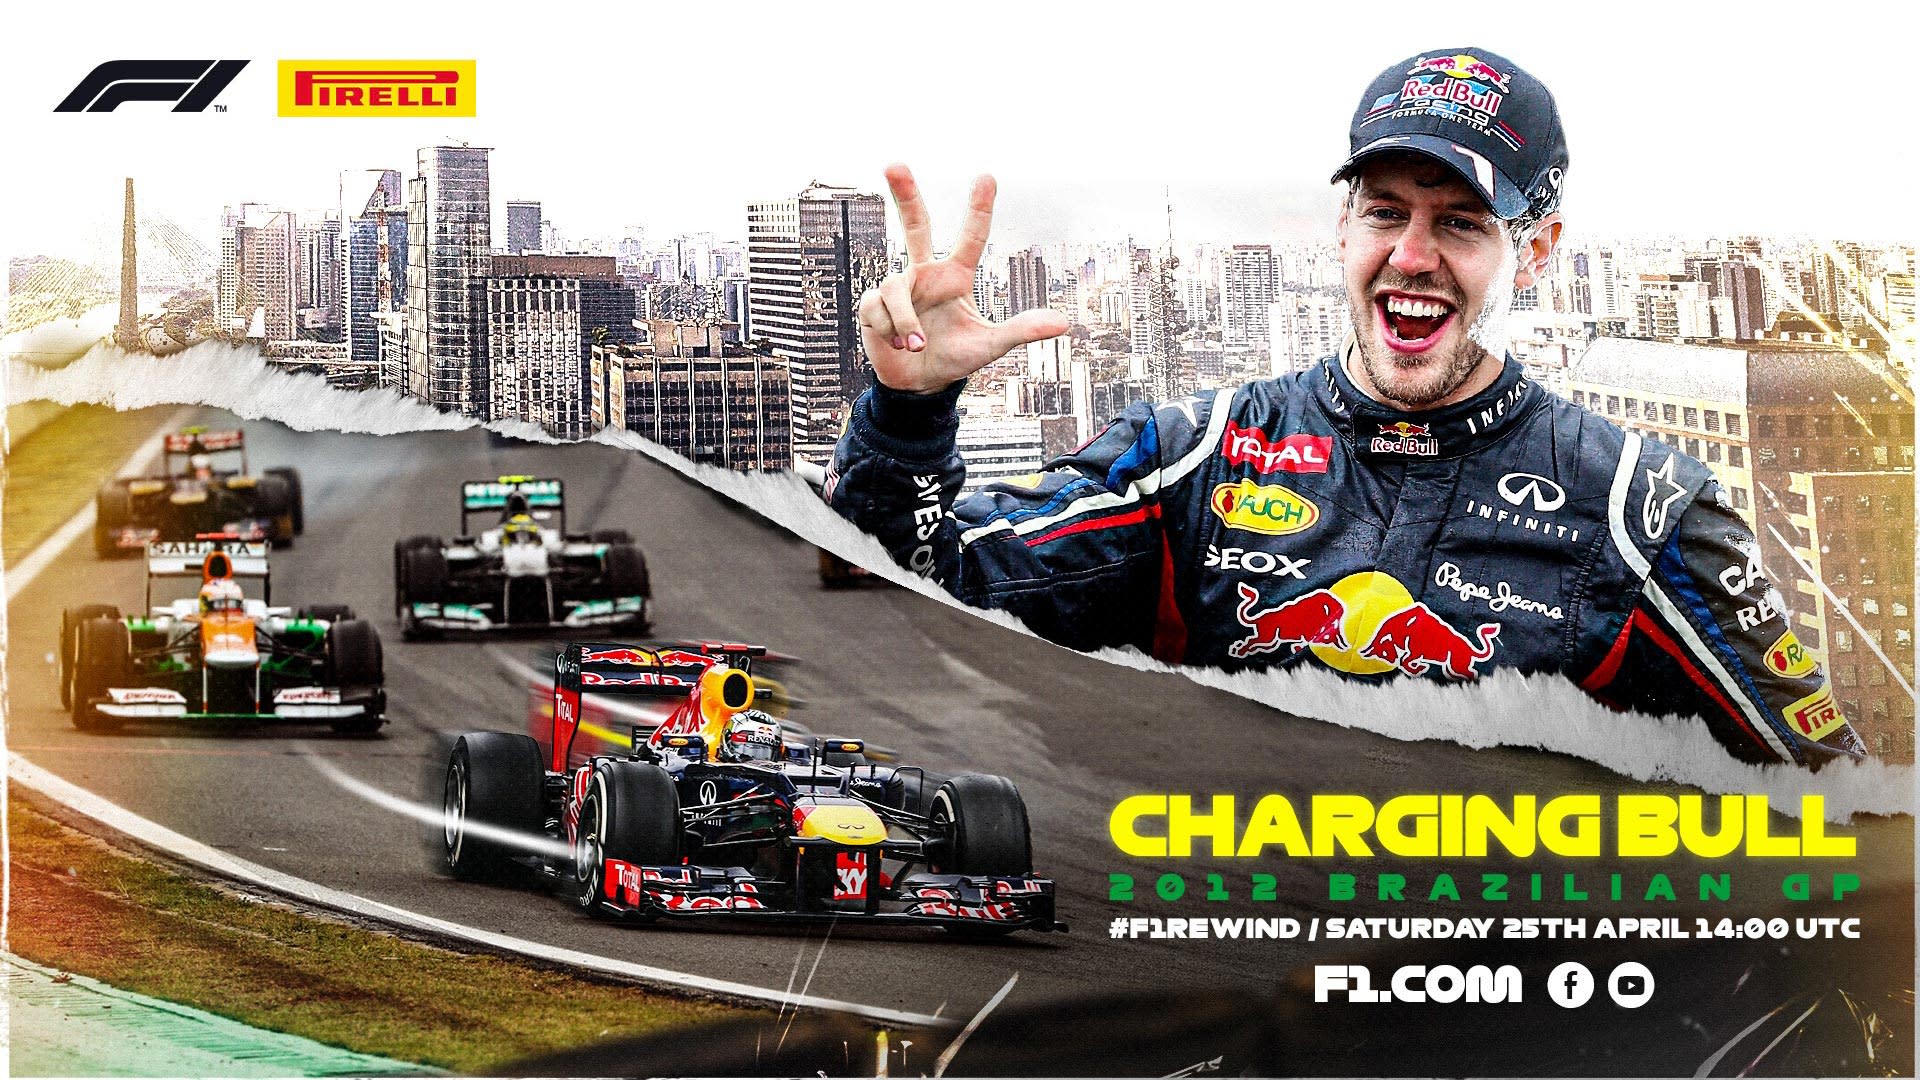 F1 Brazilian Grand Prix 2012 stream Heres why you should watch this classic from Interlagos Formula 1®